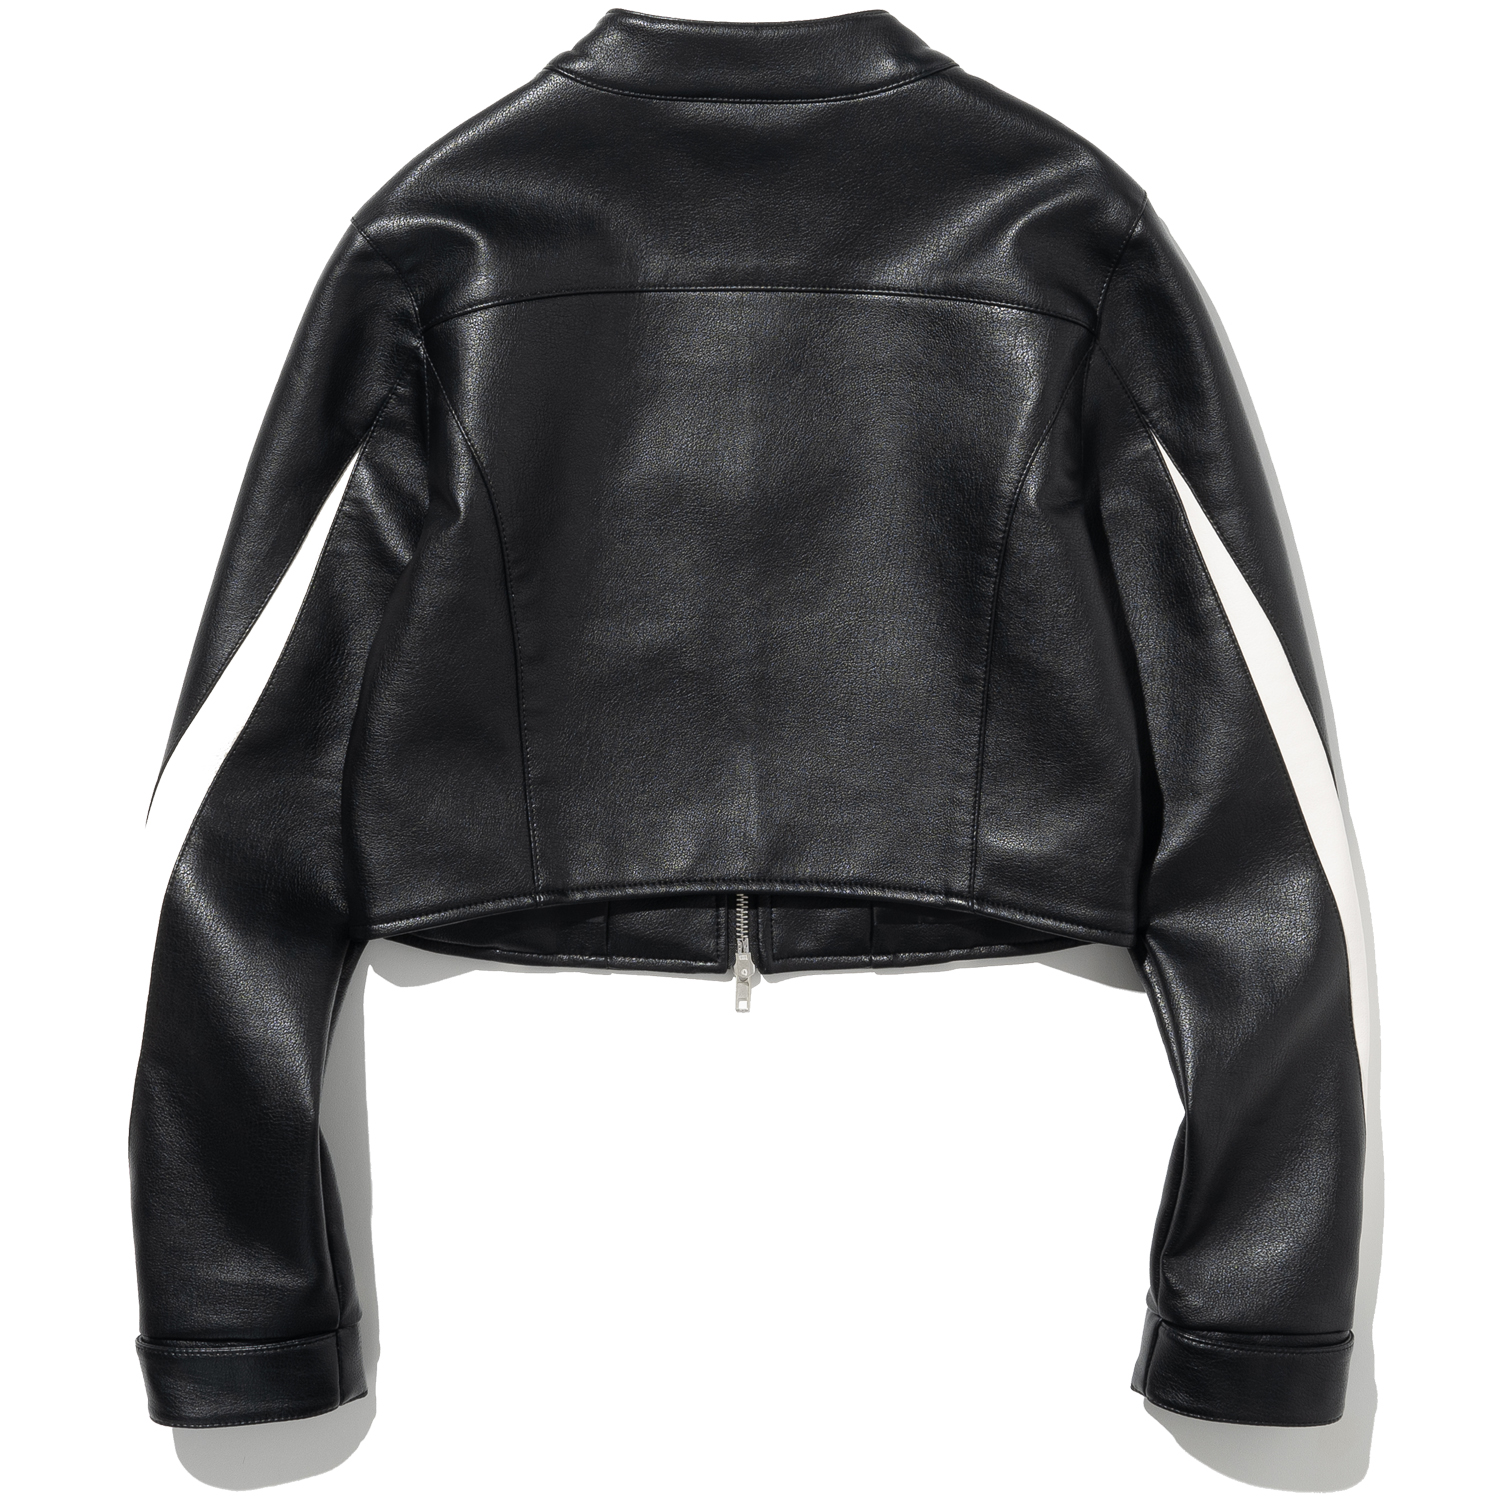 W Incision Leather Jacket - Black,NOT4NERD